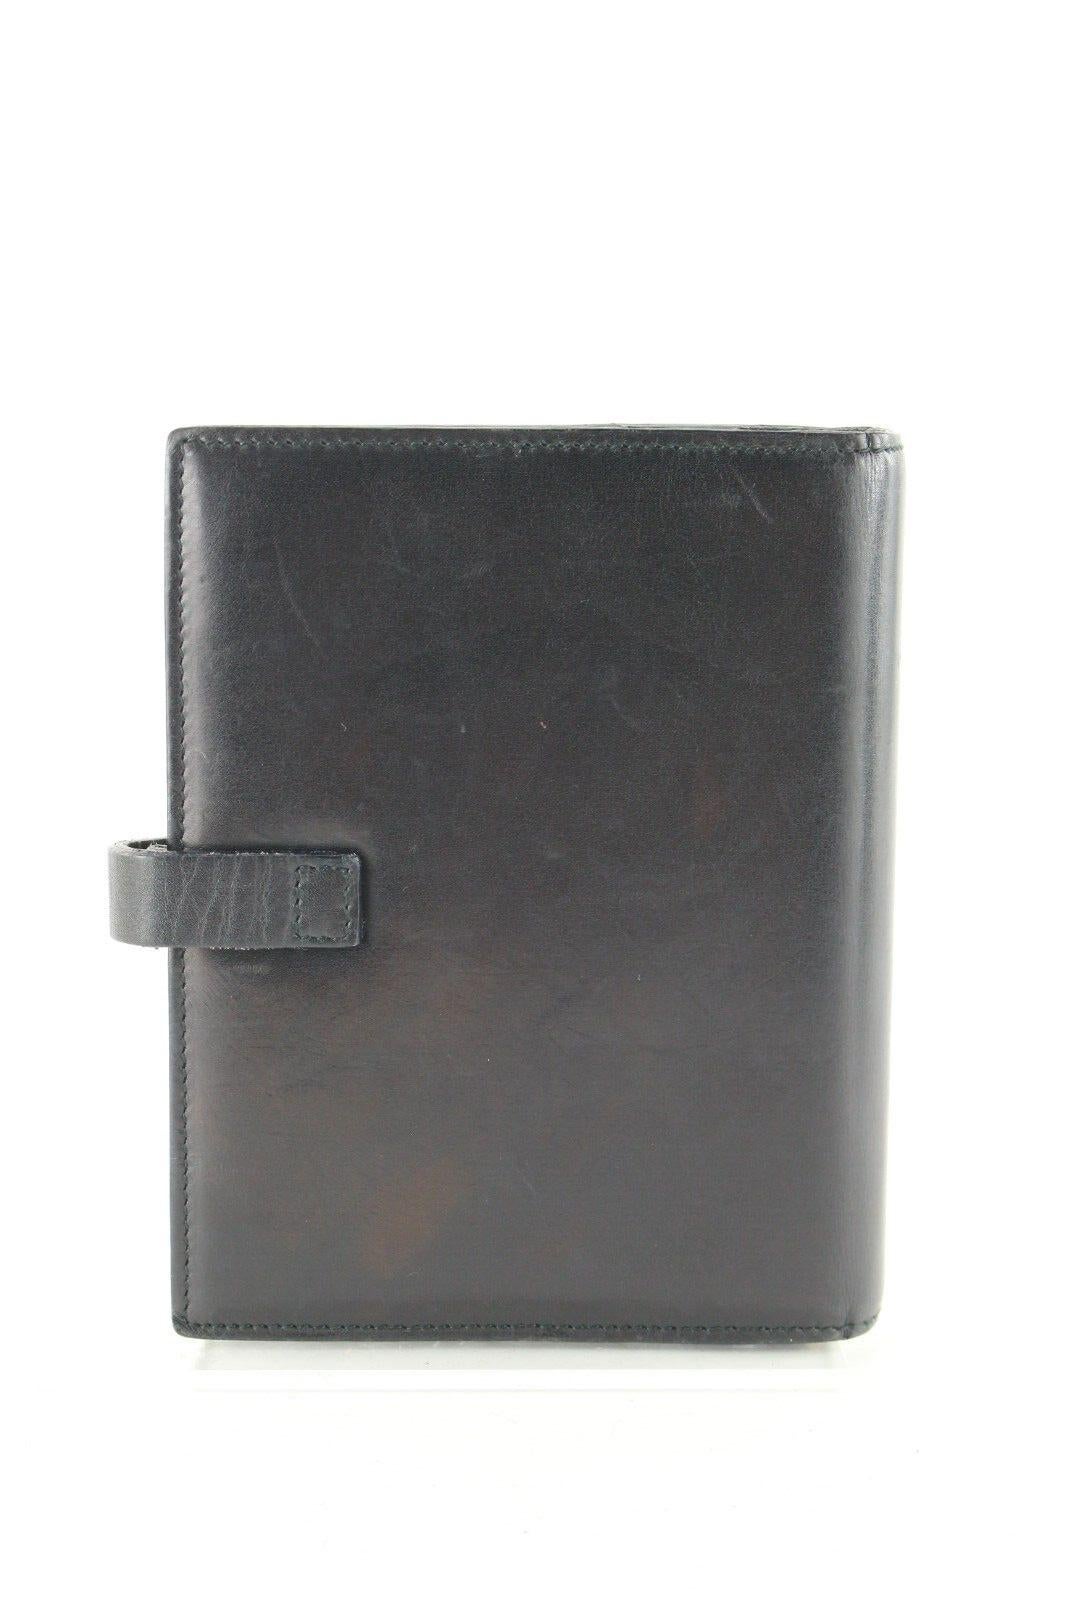 Women's or Men's GUCCI Agenda Schedule Note Book Cover Black Leather Notebook 3GG629K For Sale